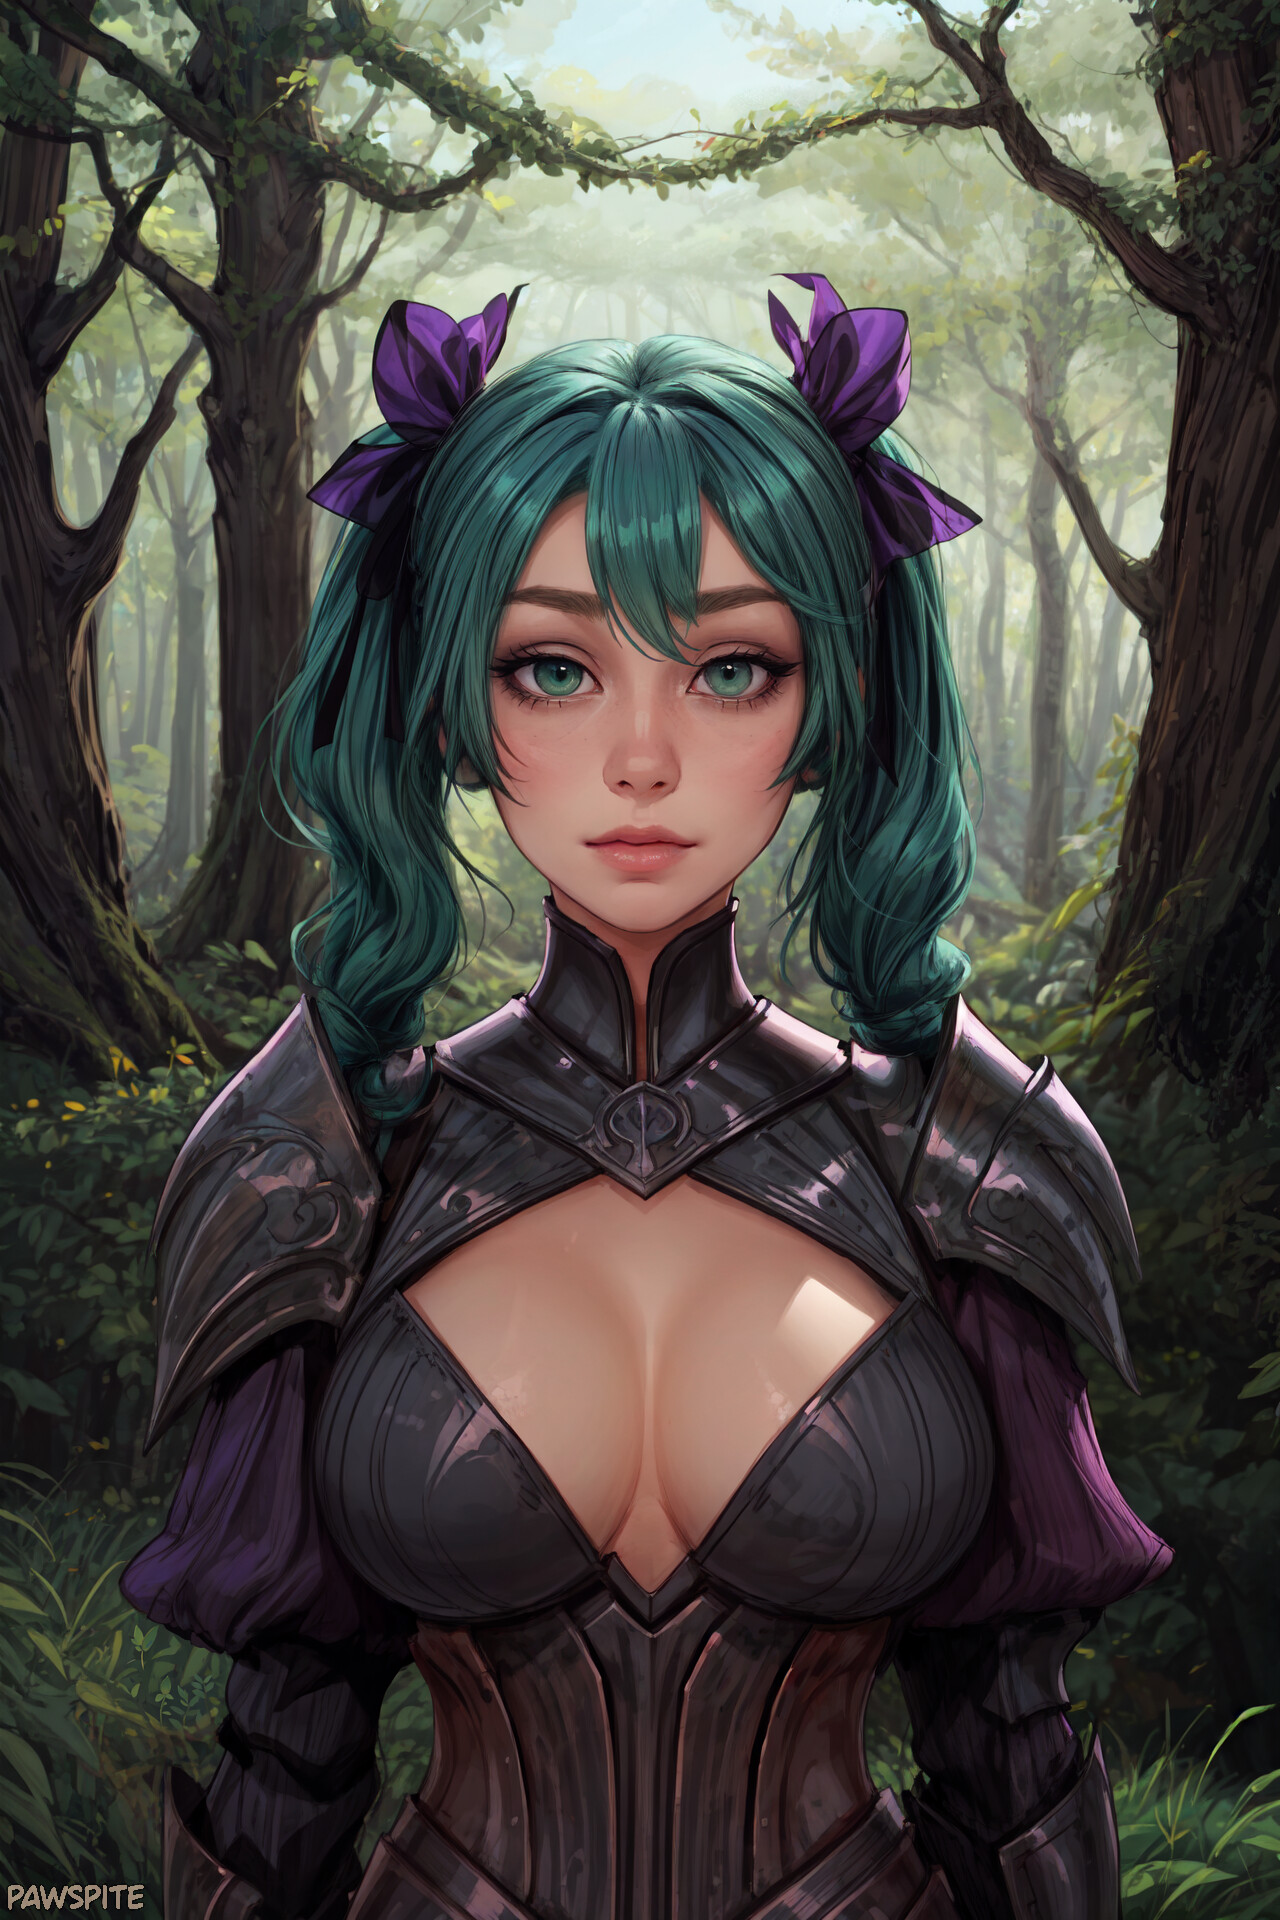 General 1280x1920 pawspite AI art Stable Diffusion women digital art illustration forest portrait display twintails portrait neckline looking at viewer trees green hair armor big boobs